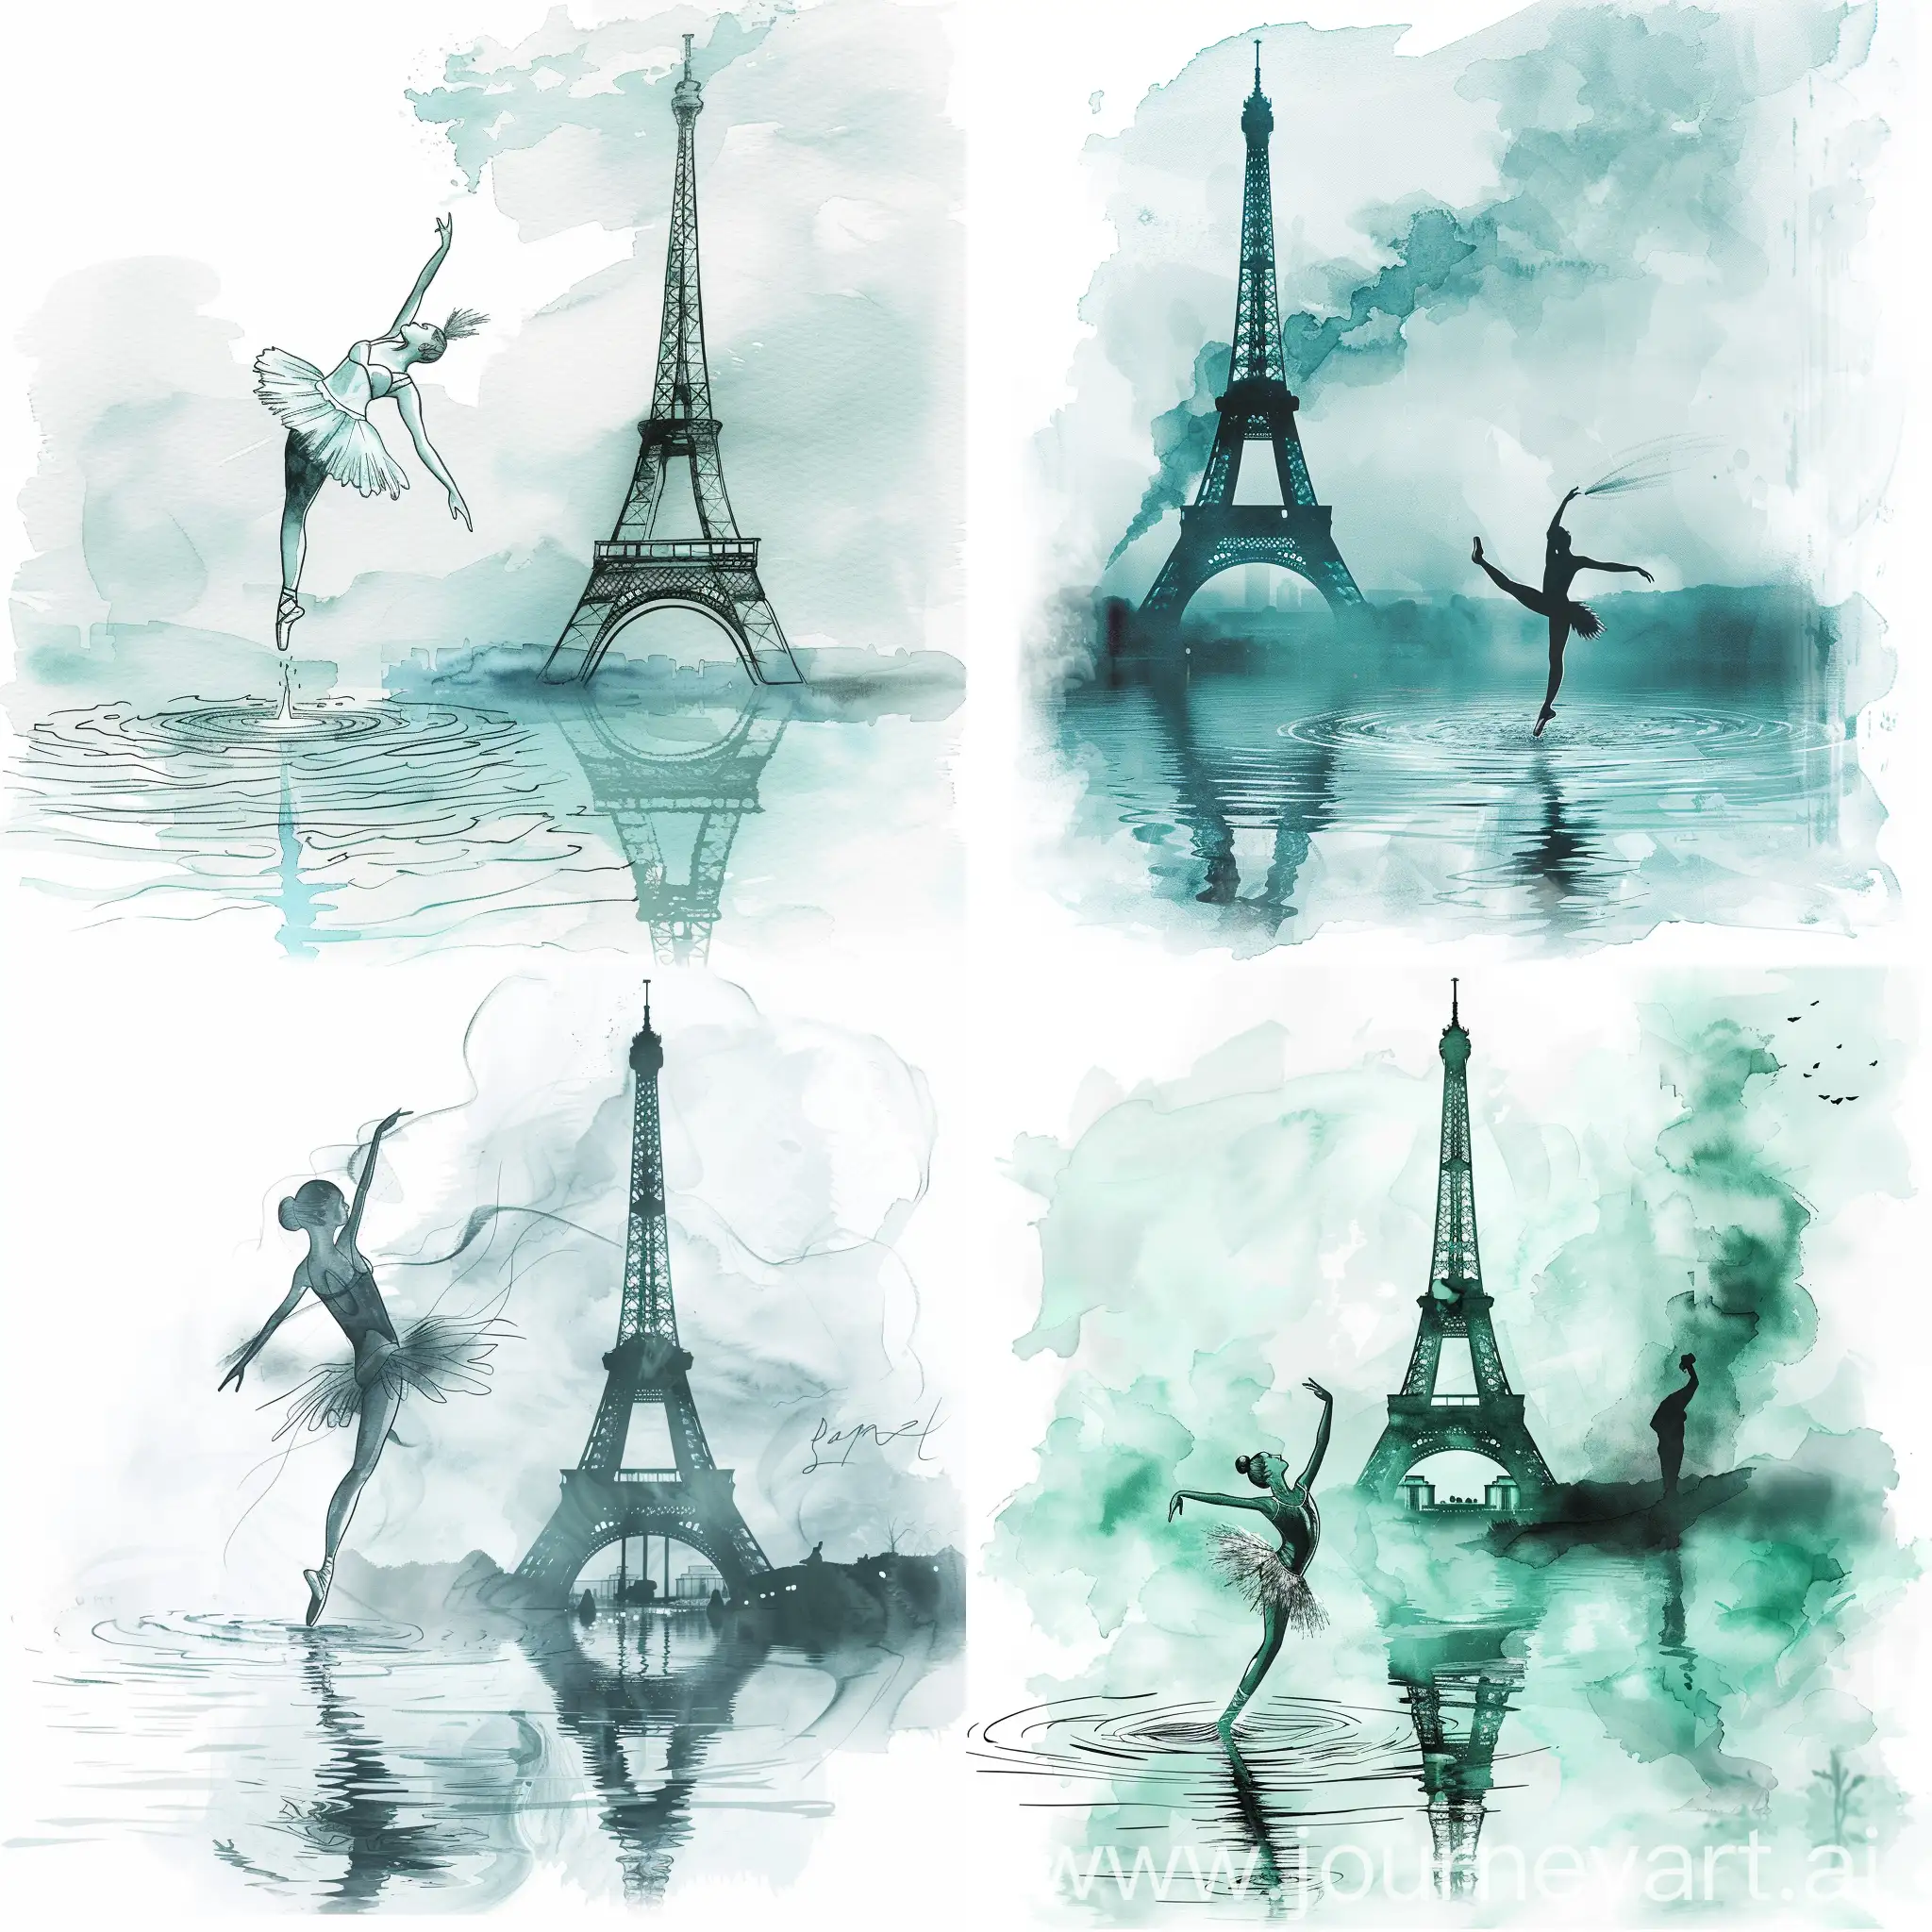 watercolor illustrations of a ballerina dancing on water, next to the Eiffel tower, smokey background, expressive style, soft lines, relatable personality, energy-filled illustrations